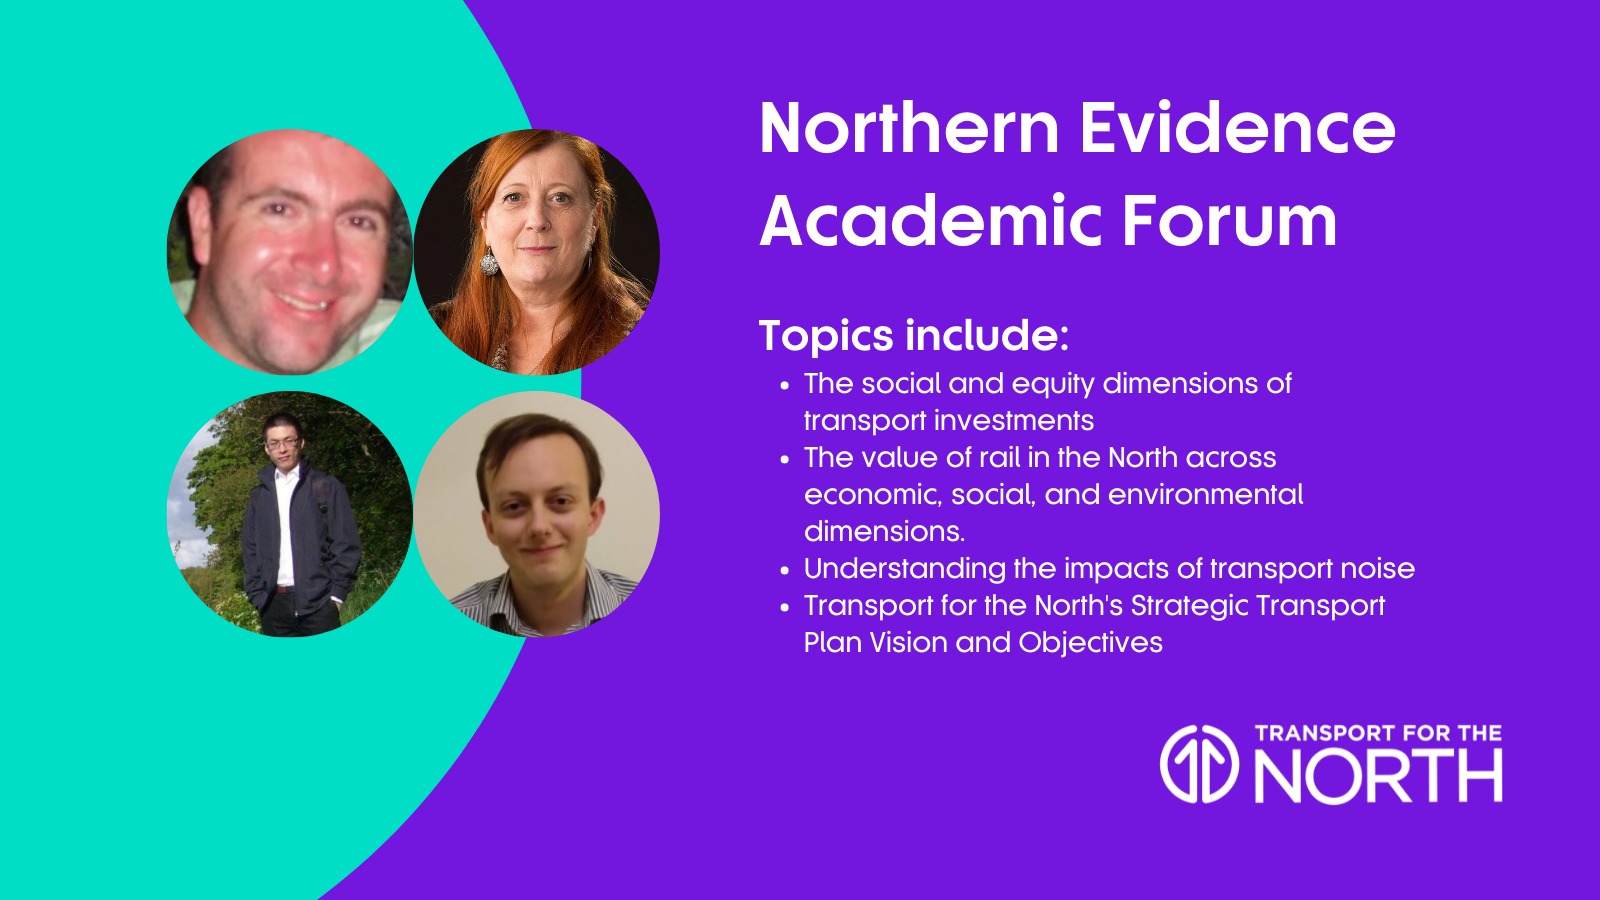 Guests for September 2022's Northern Evidence Academic Forum